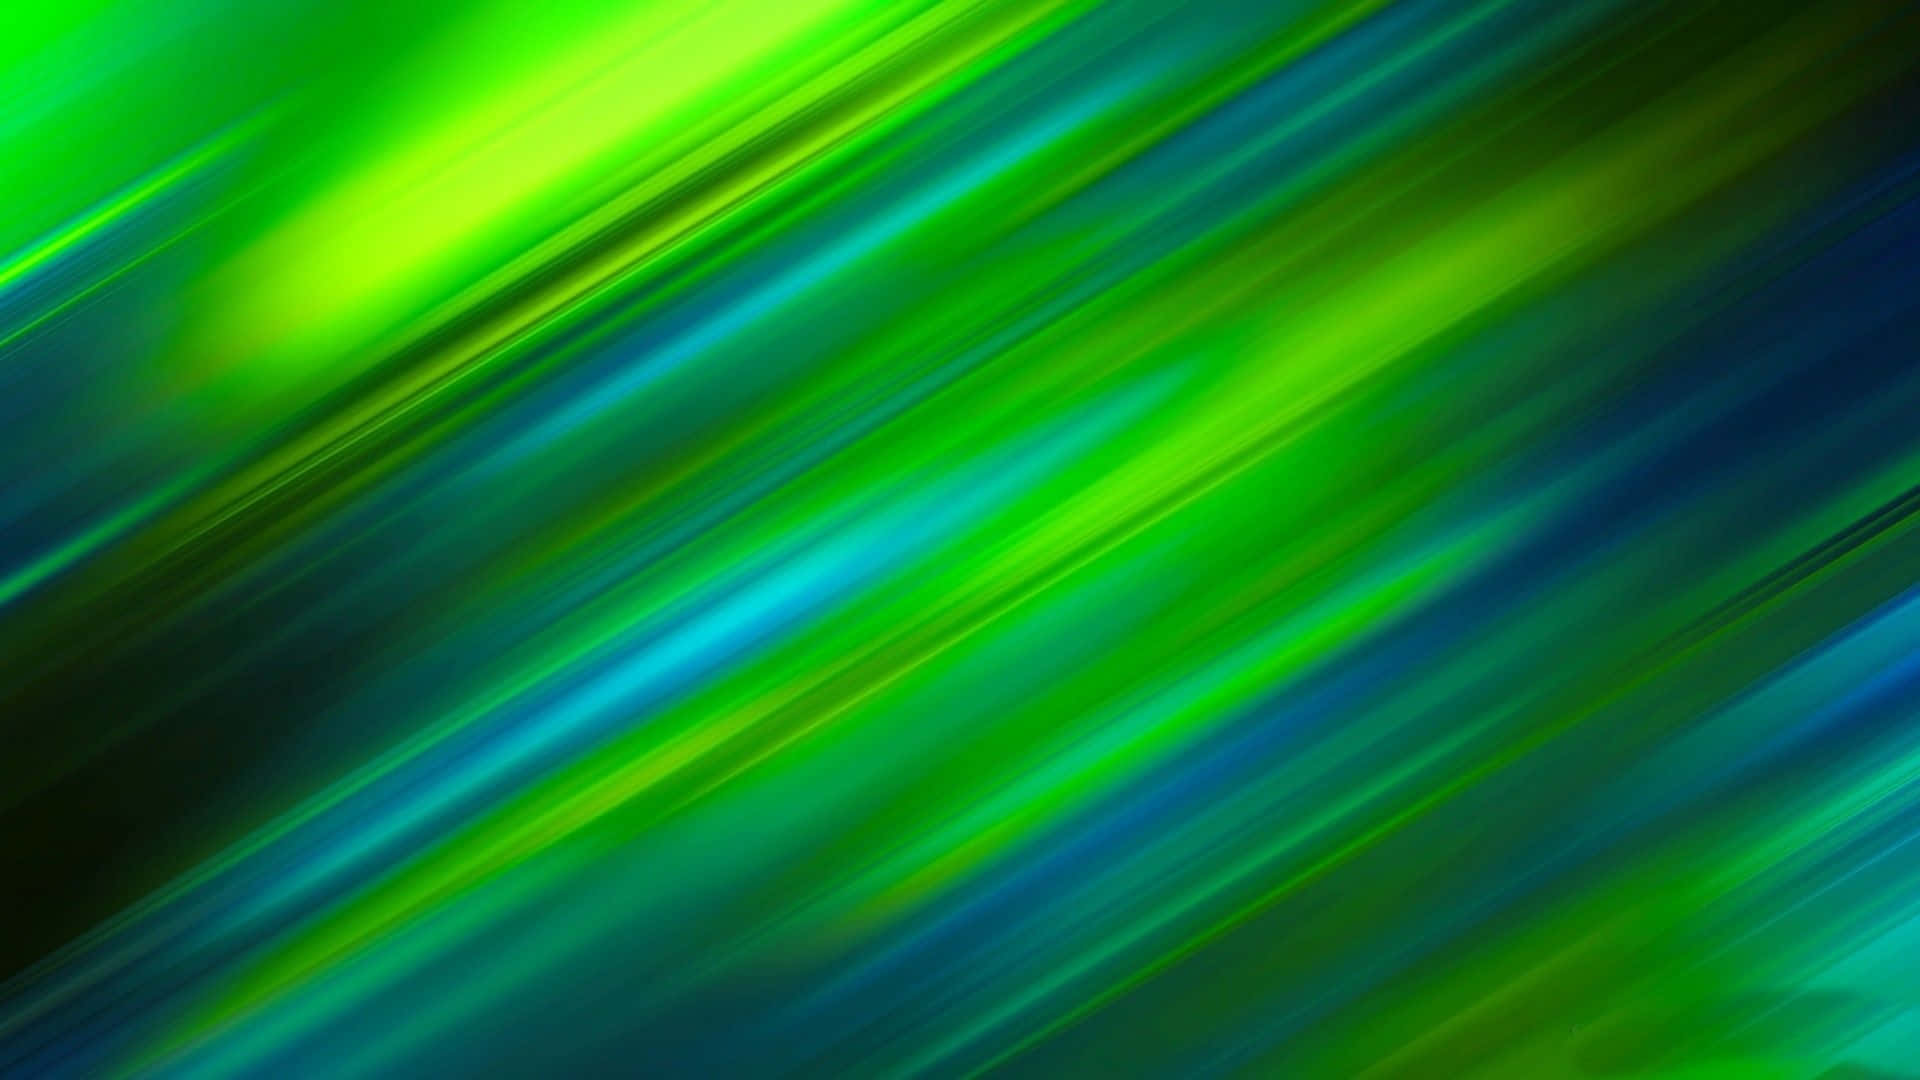 Cool Blue And Green Wallpaper